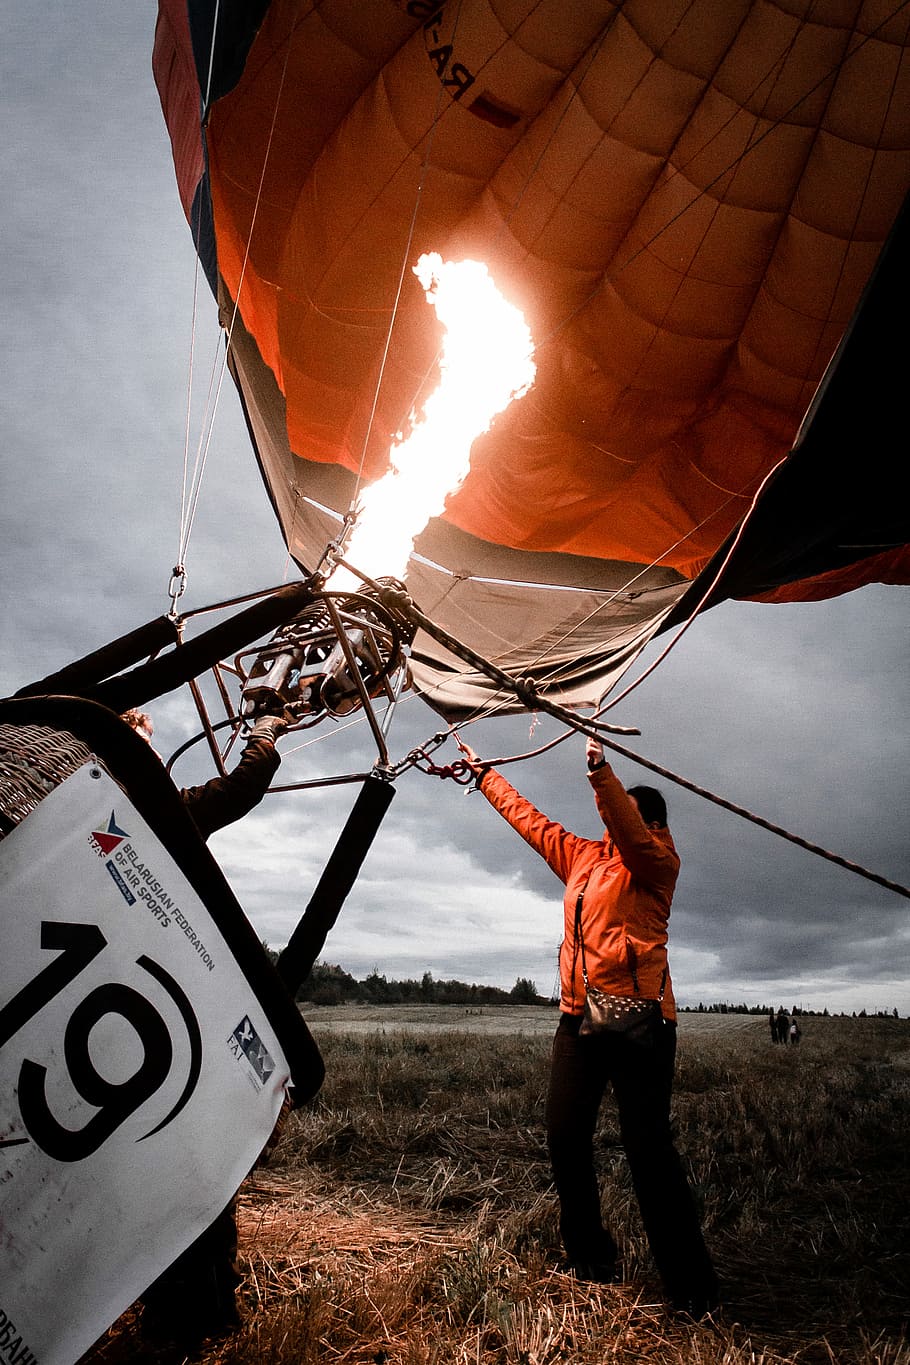 person arranging orange and black hot air balloon during daytime, man holding gray hot air balloon